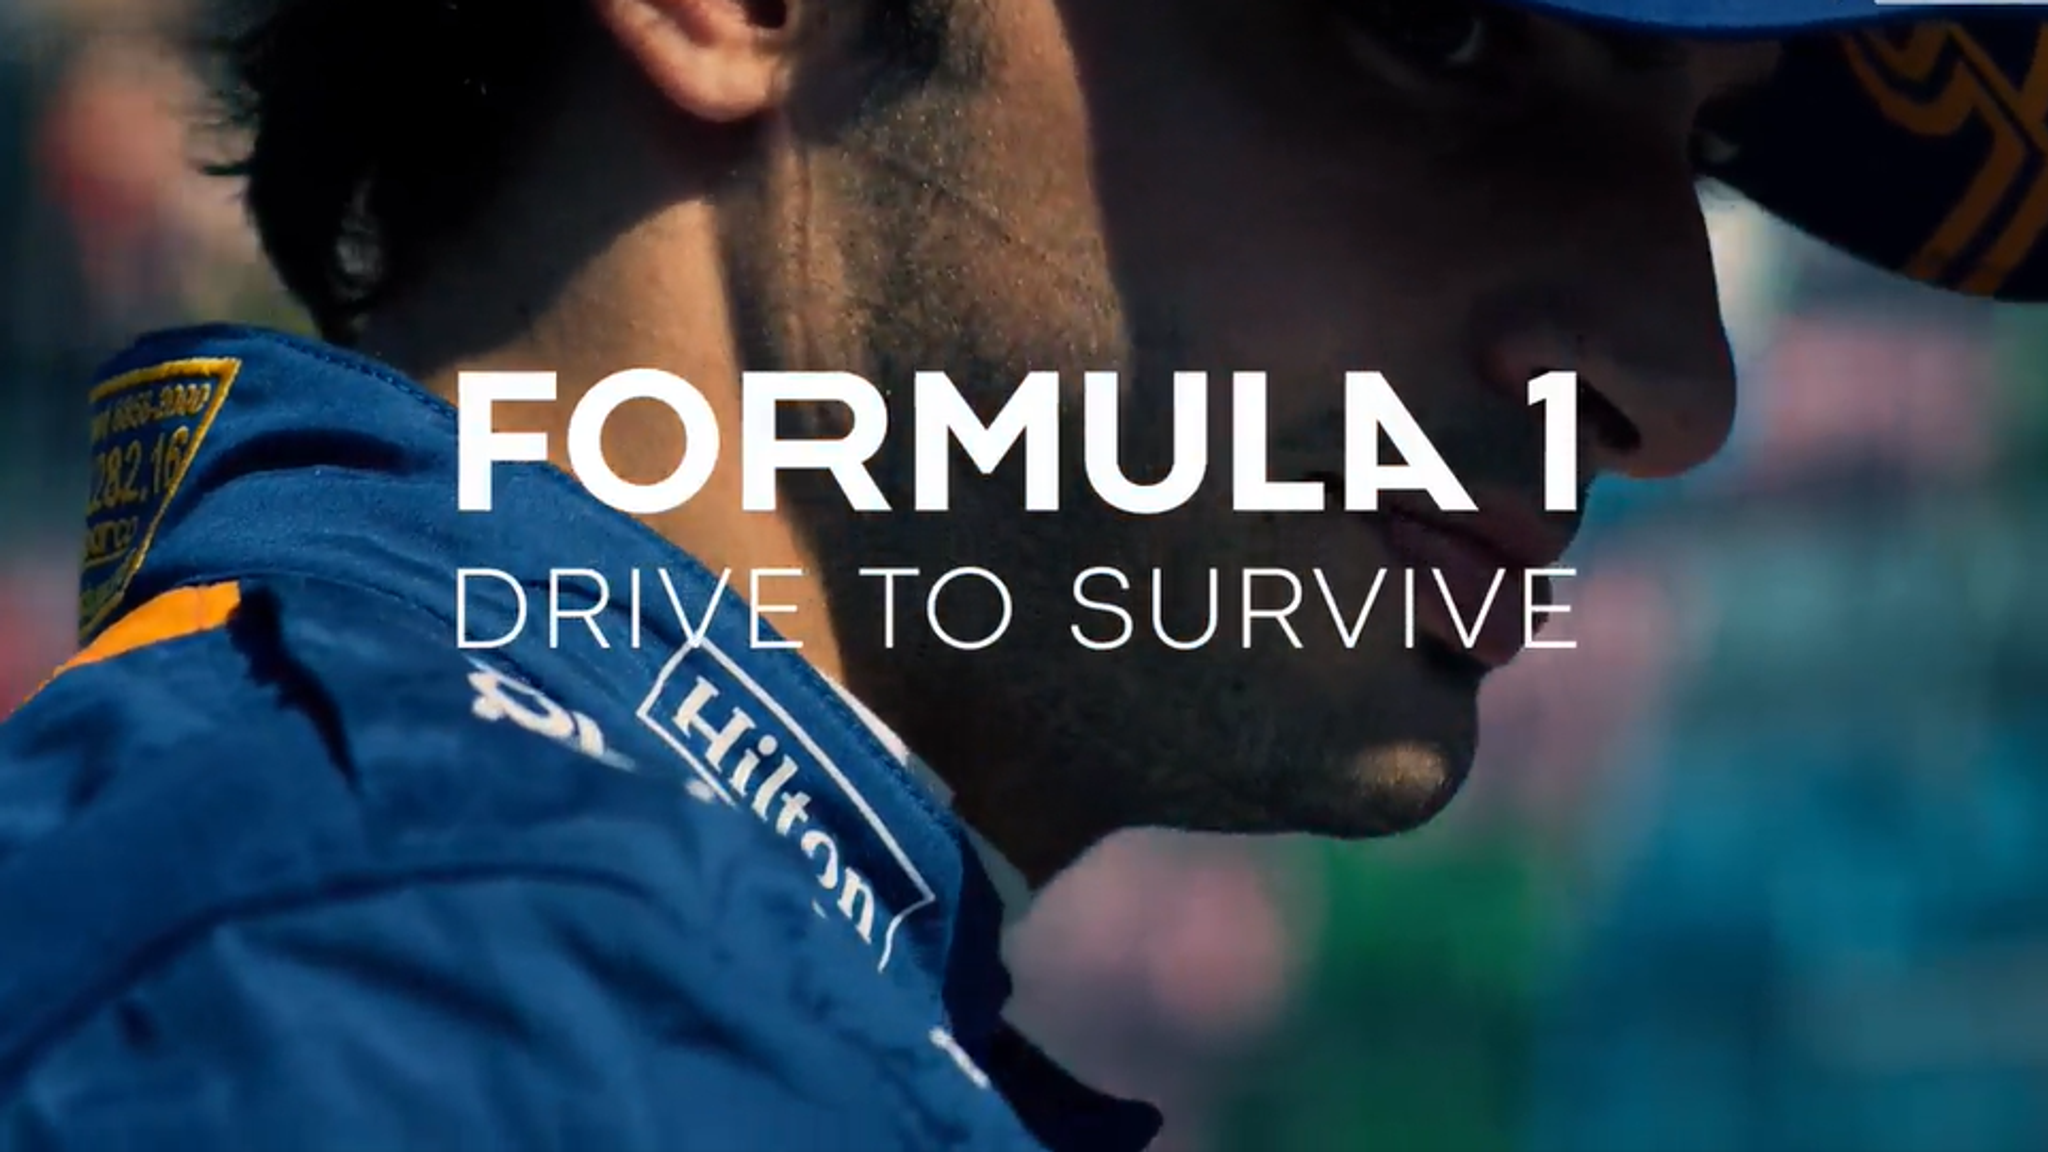 Drive to survive: Netflix's new F1 documentary series - Page 3 - Team-BHP